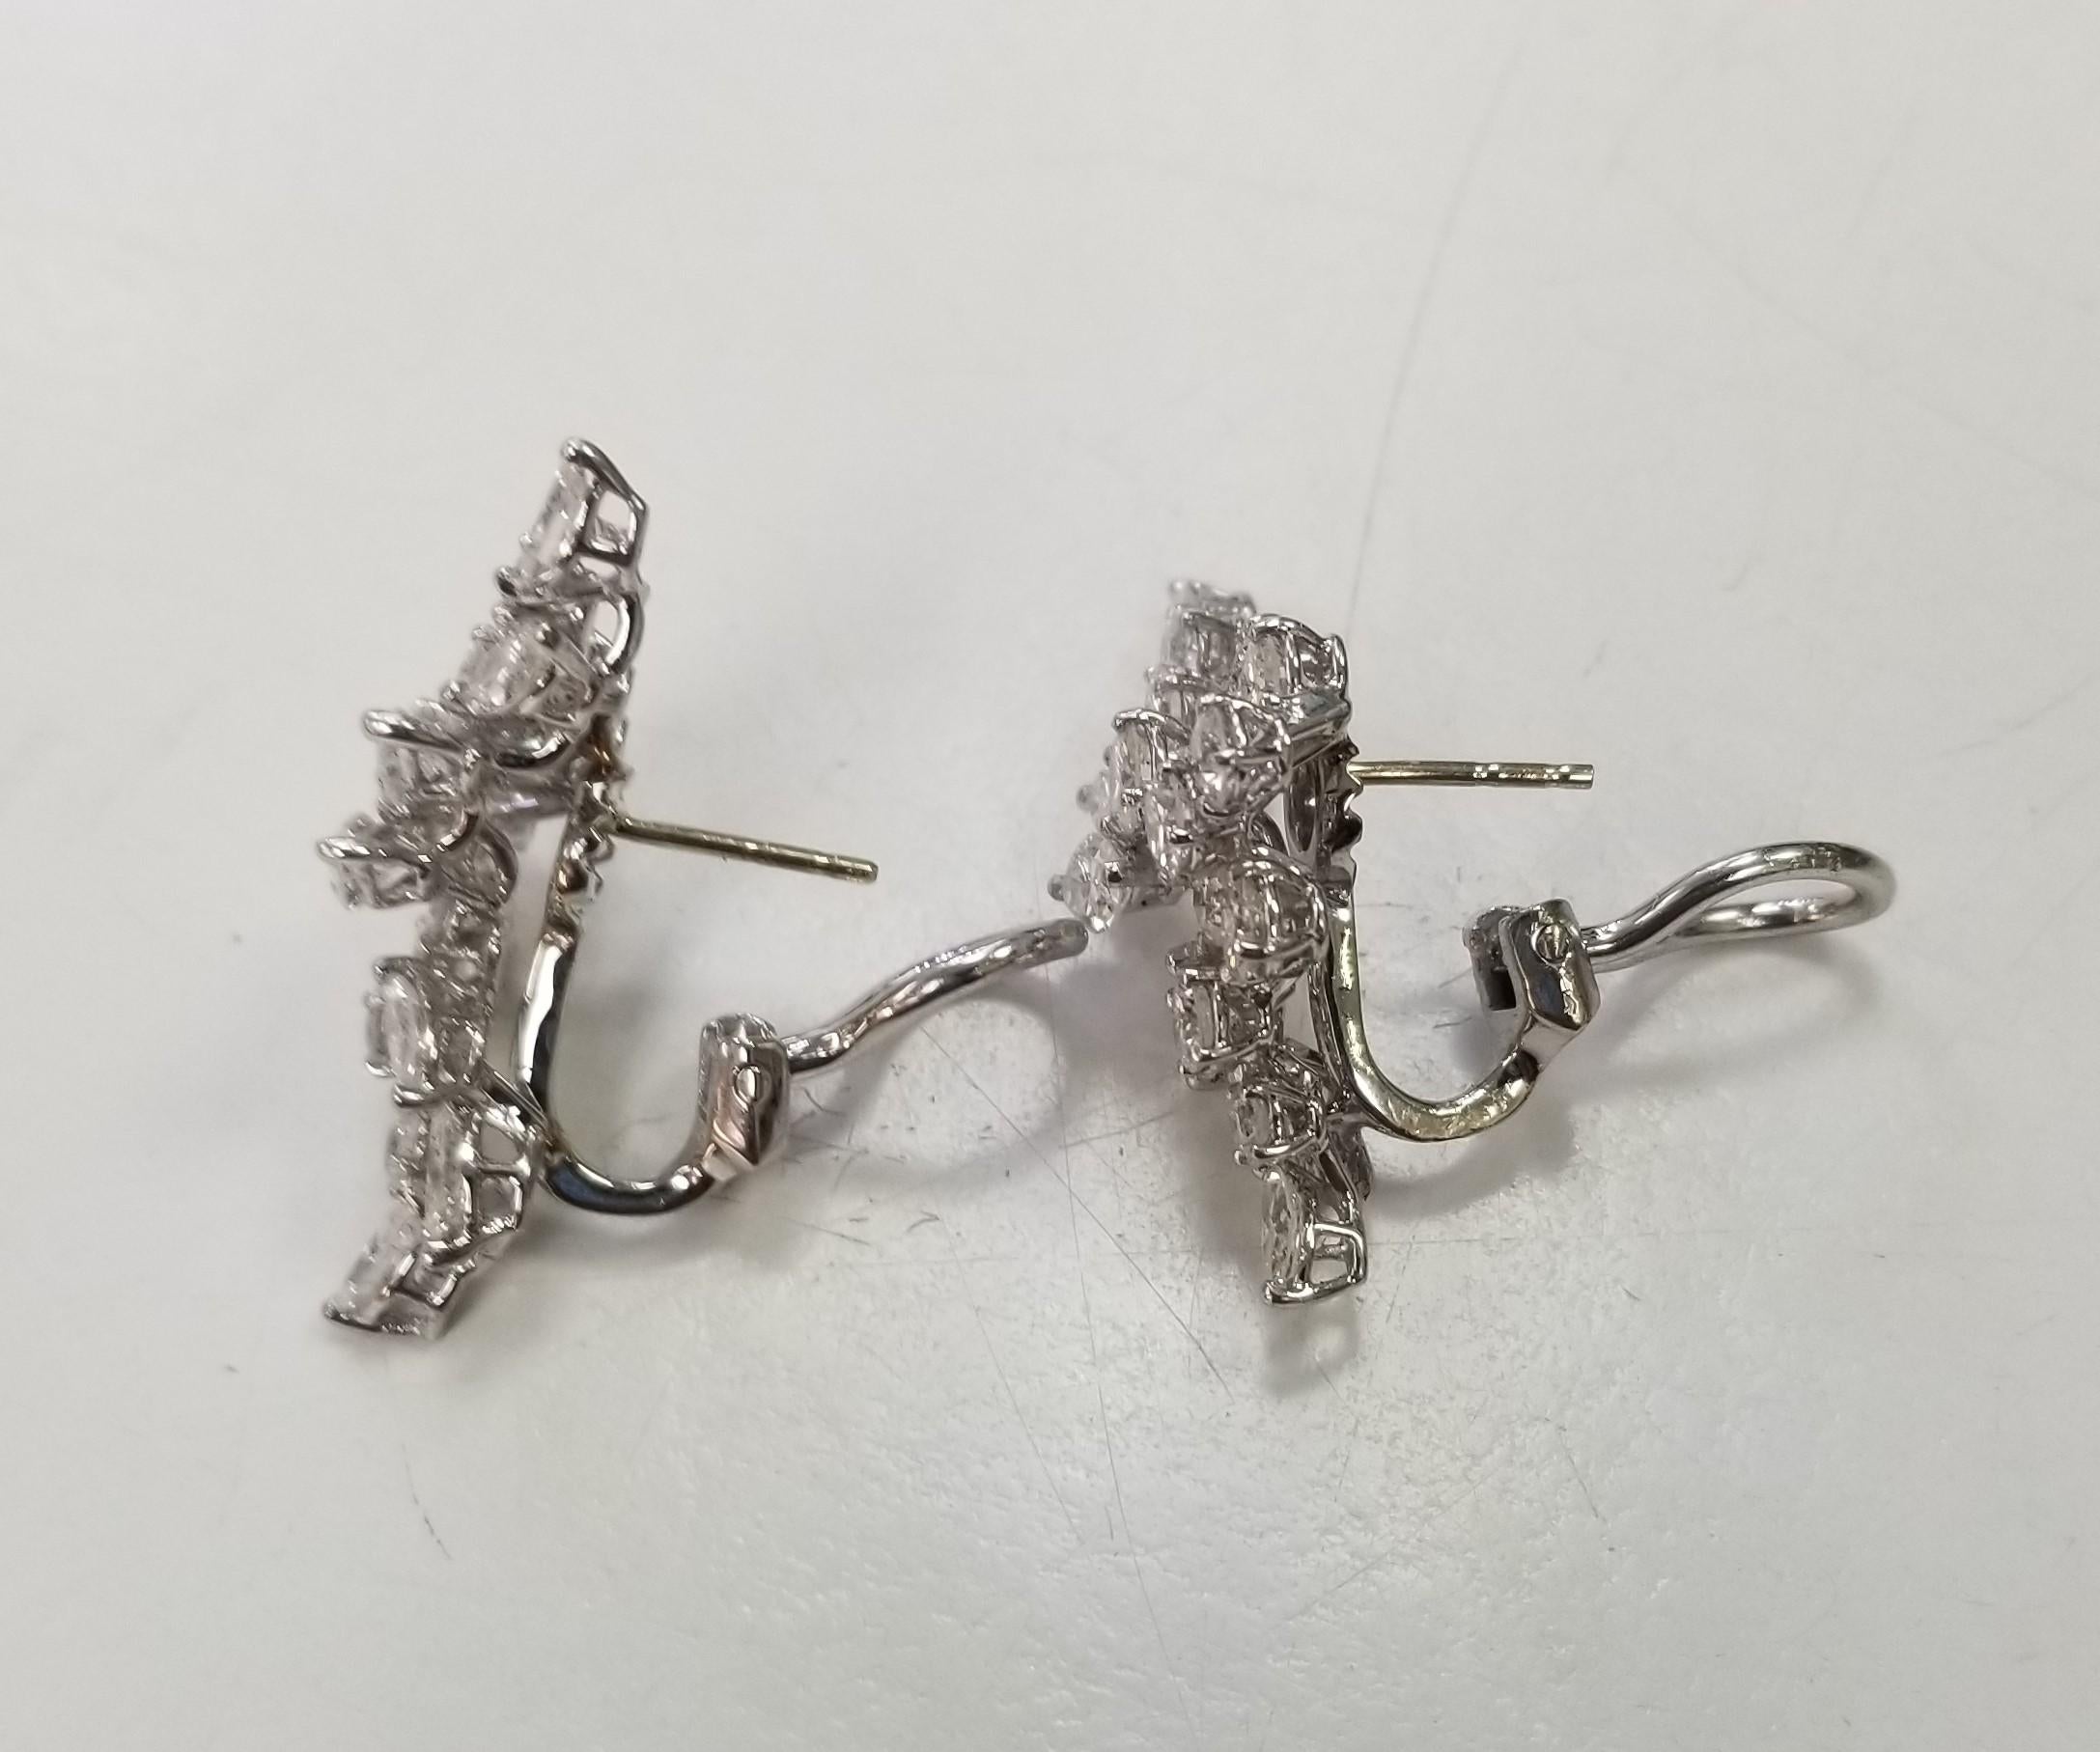  Vintage Art Deco Style Platinum and  Diamond Earrings 4.02 carats In Excellent Condition For Sale In Los Angeles, CA